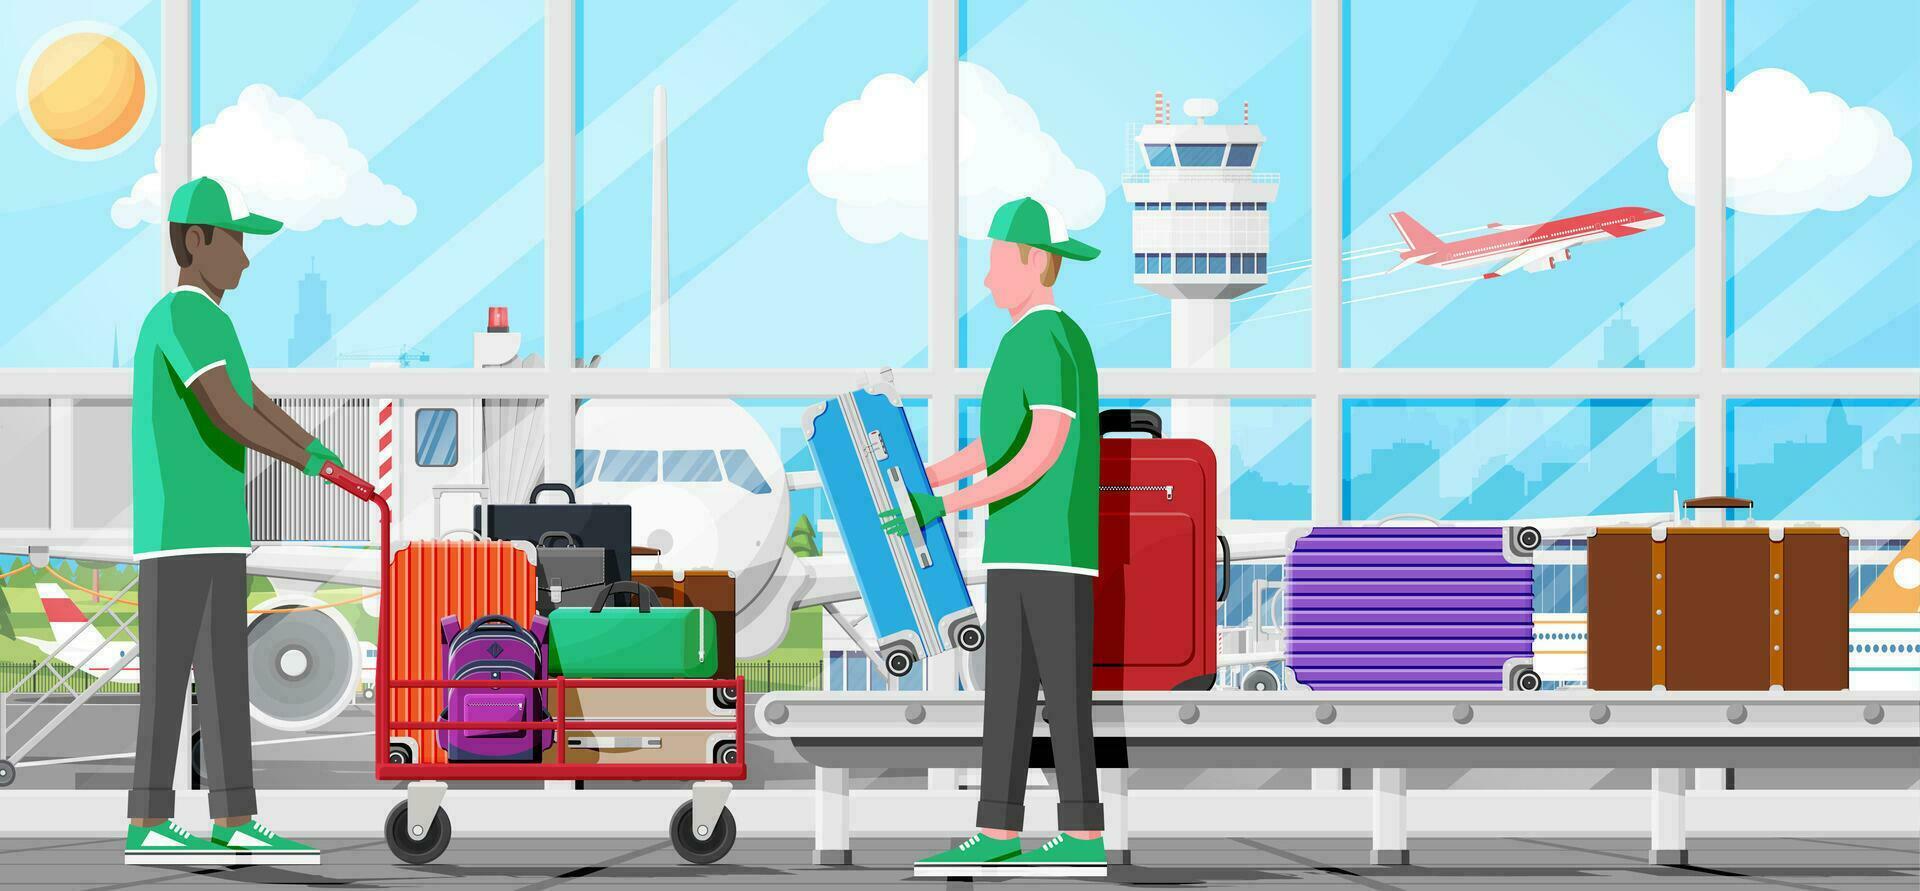 Modern and Vintage Travel Bag on Hand truck. Male Mover, Airport Conveyor Belt. Plastic, Leather Business Case. Trolley on Wheels. Travel Backpack, Urban Baggage and luggage. Flat Vector Illustration